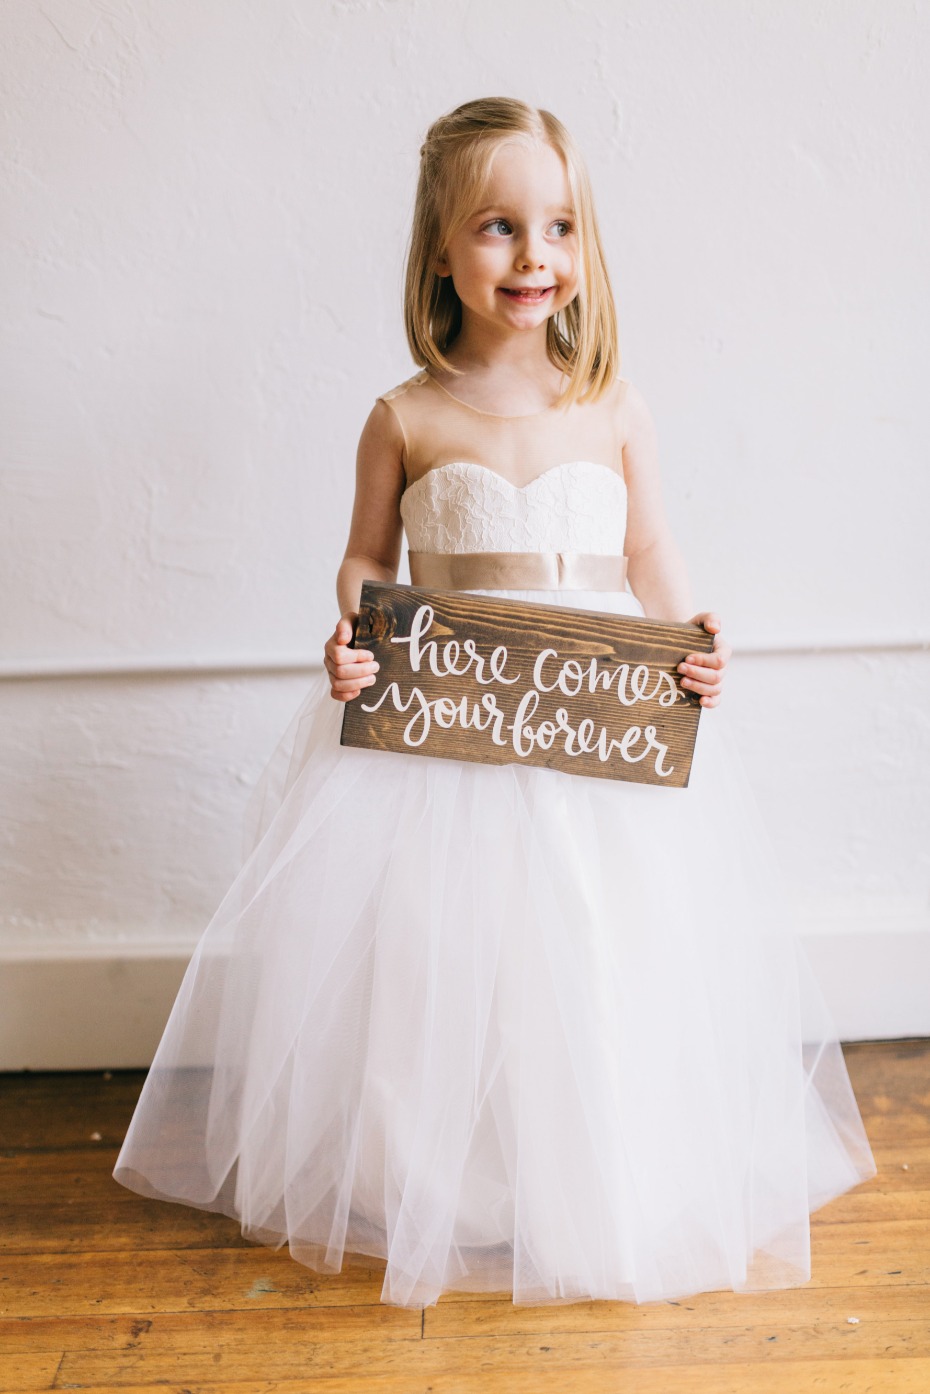 here comes your forever wedding sign